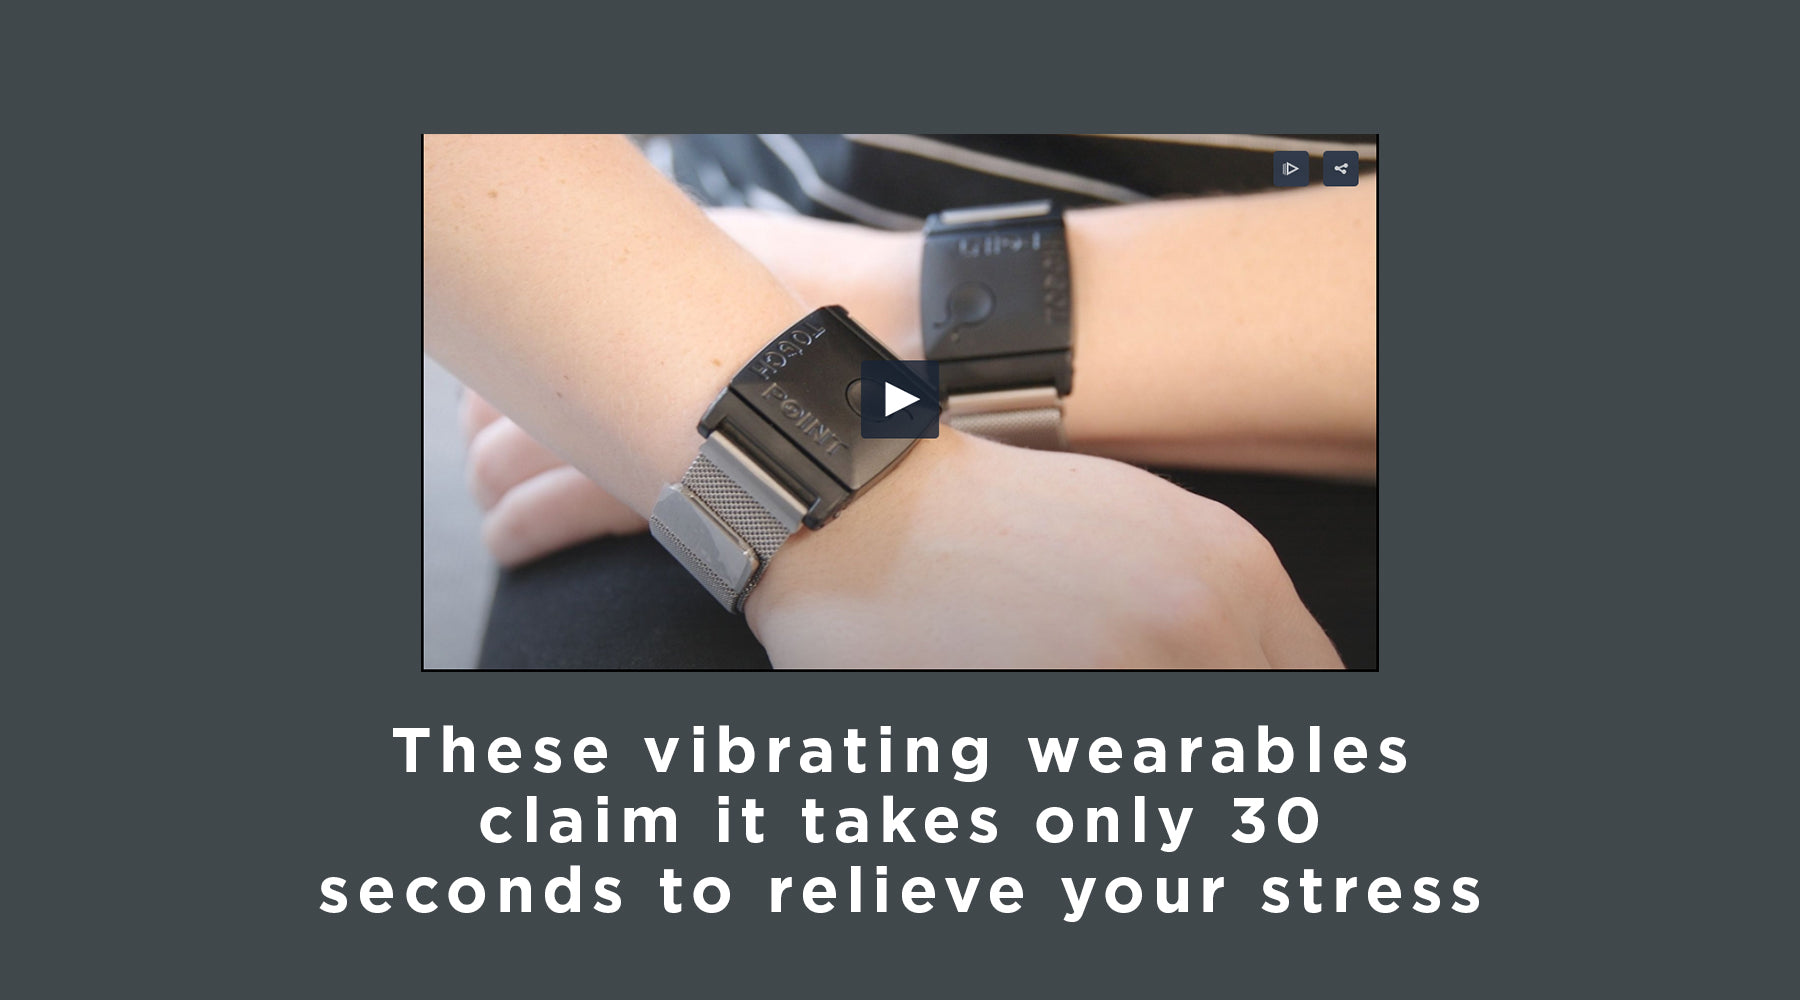 Mashable - These vibrating wearables claim it takes only 30 seconds to relieve your stress